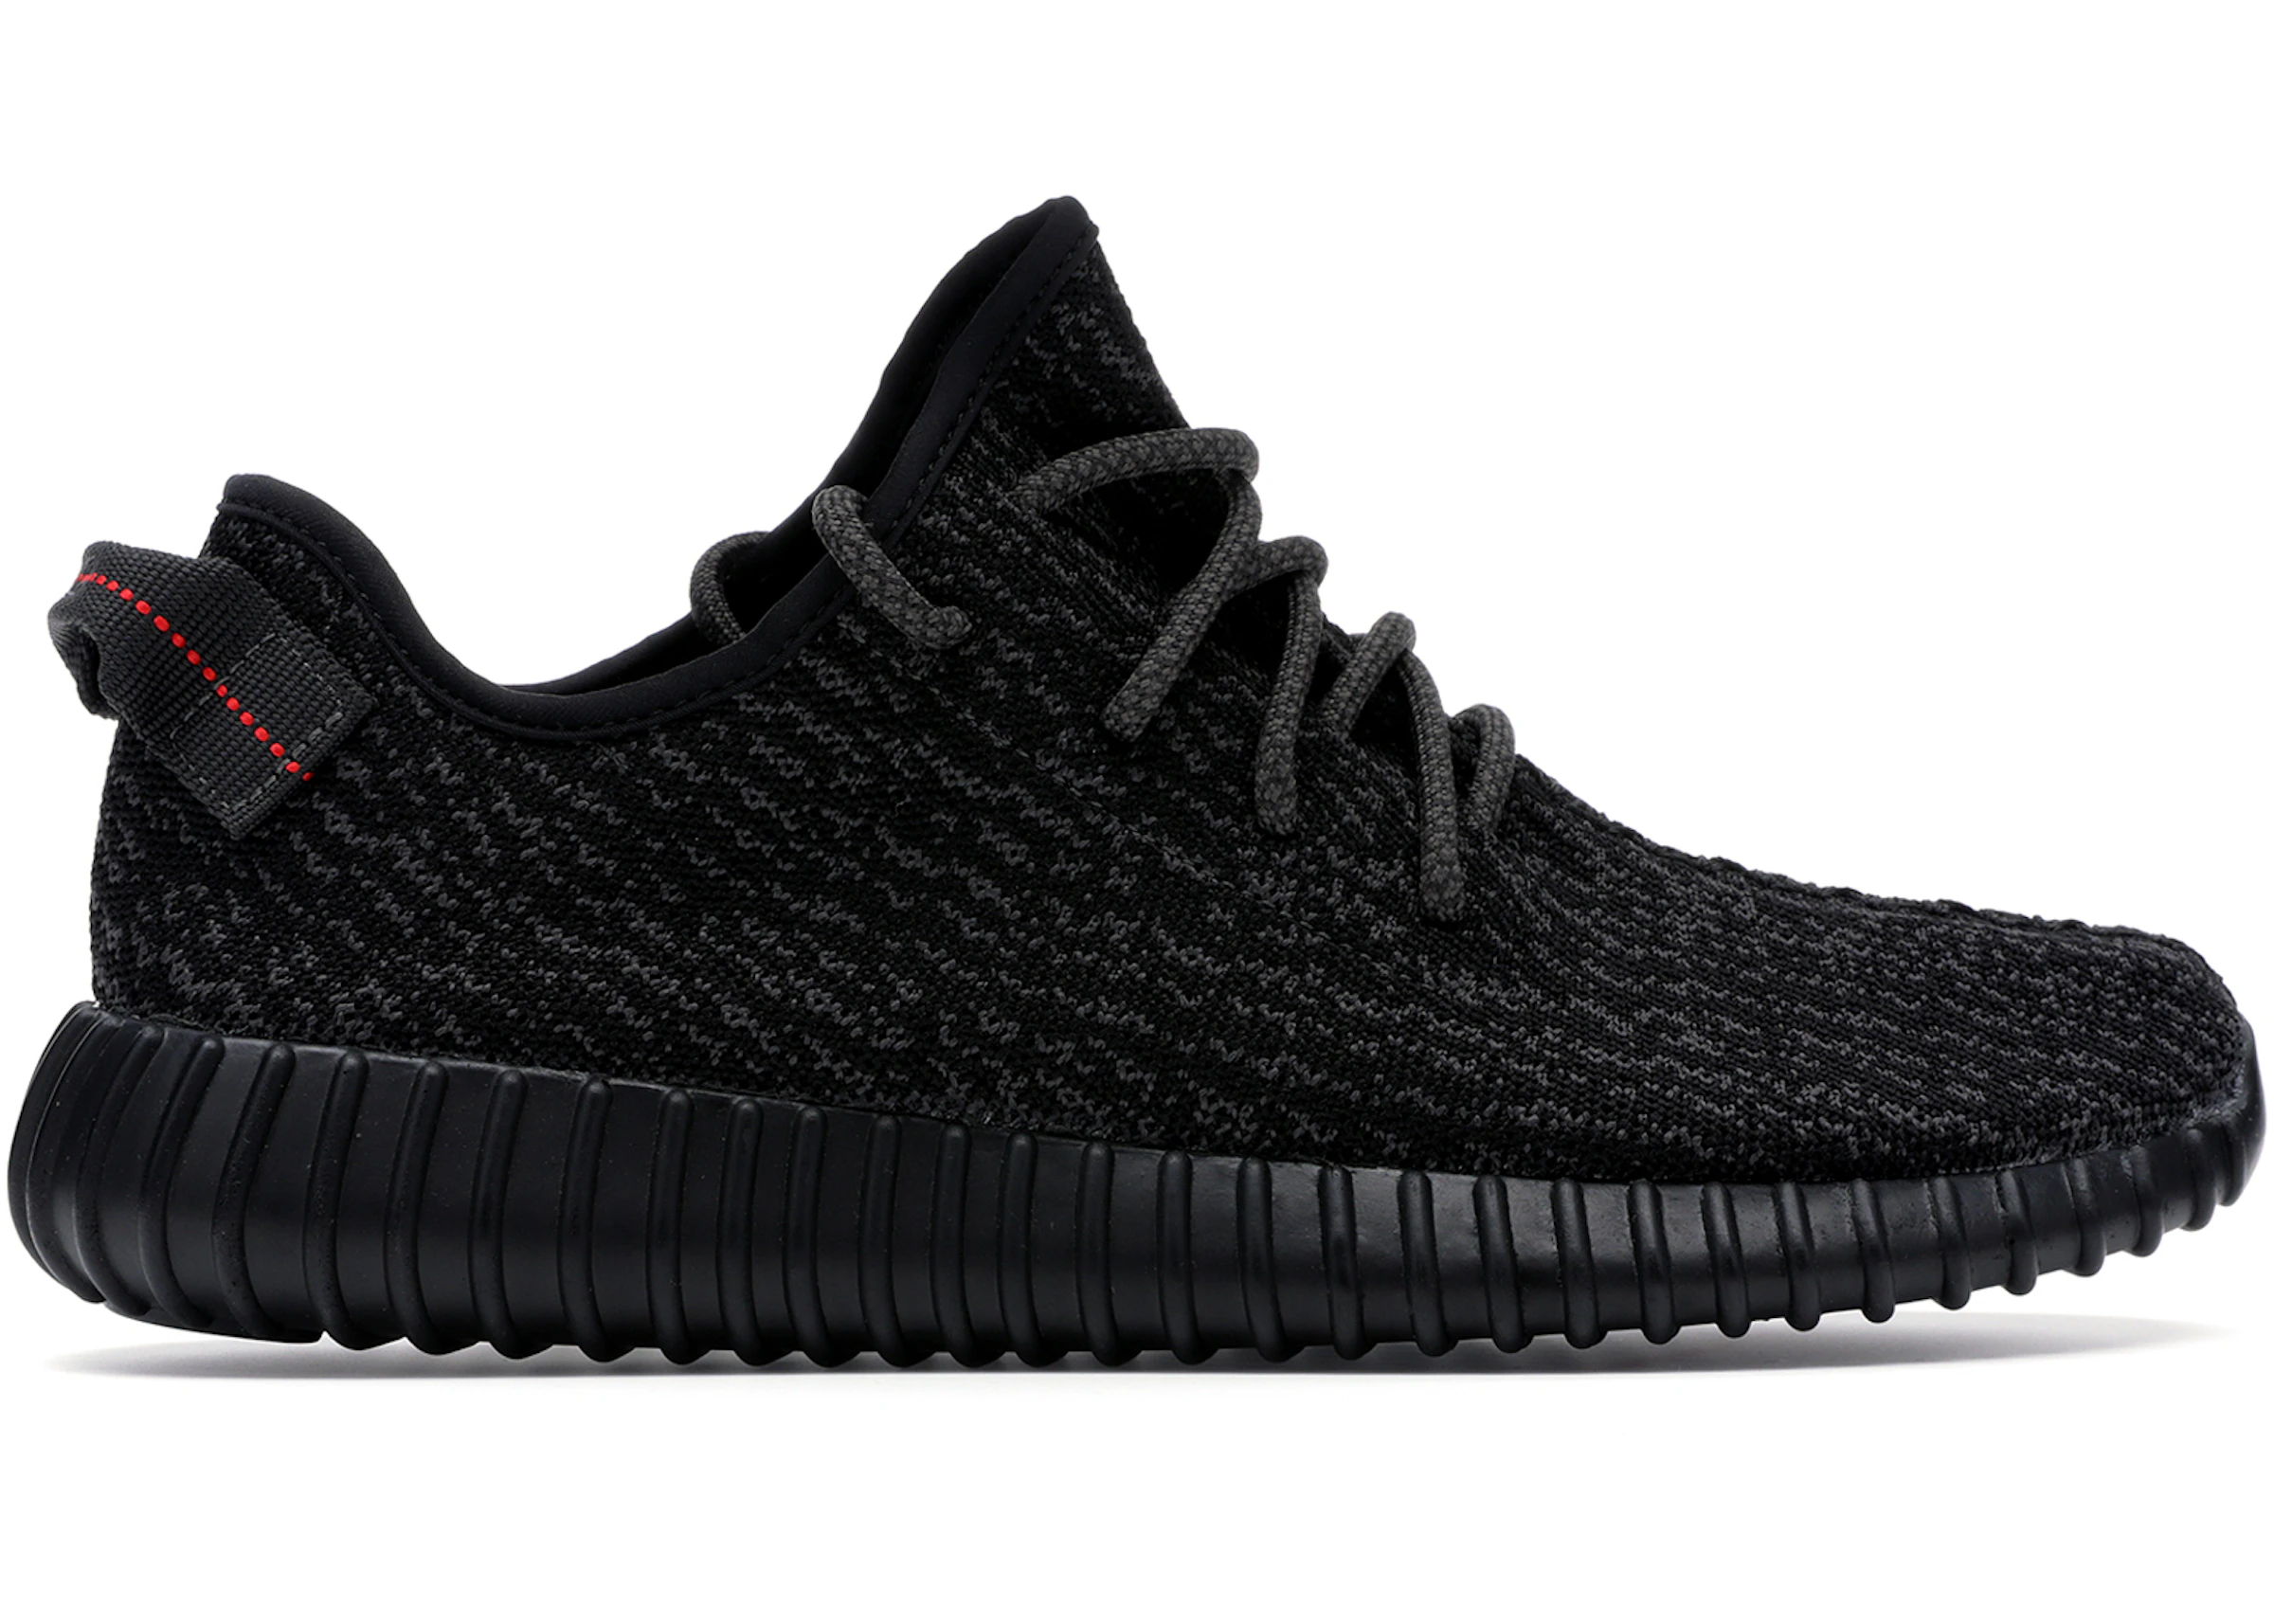 Brother Odds watch TV adidas Yeezy Boost 350 Pirate Black (2016) - BB5350 - US